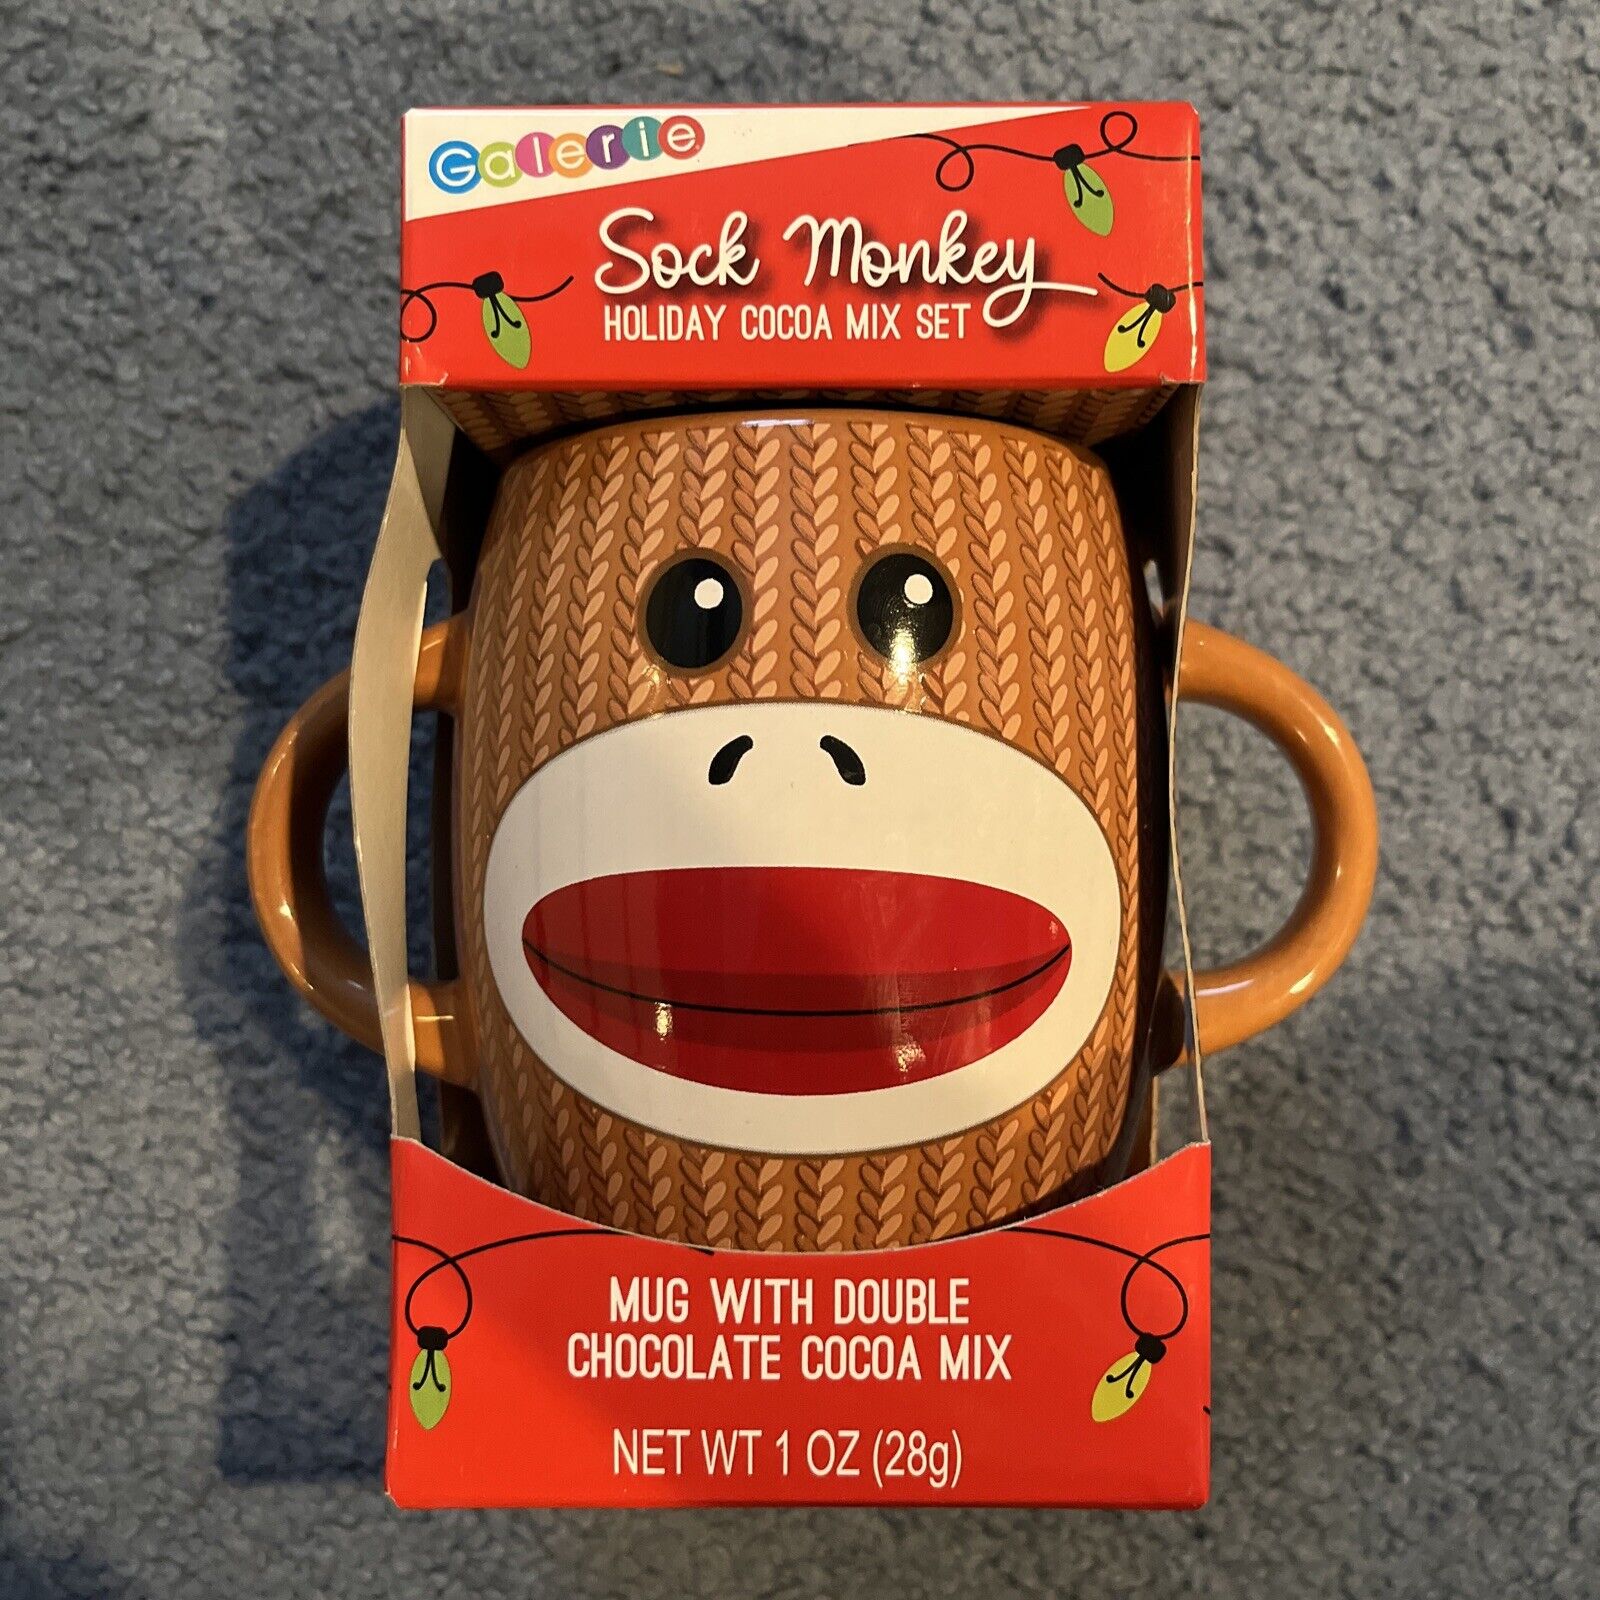 Galerie Double Handle Sock Monkey Ceramic Mug Cup New In Box-Mug Only